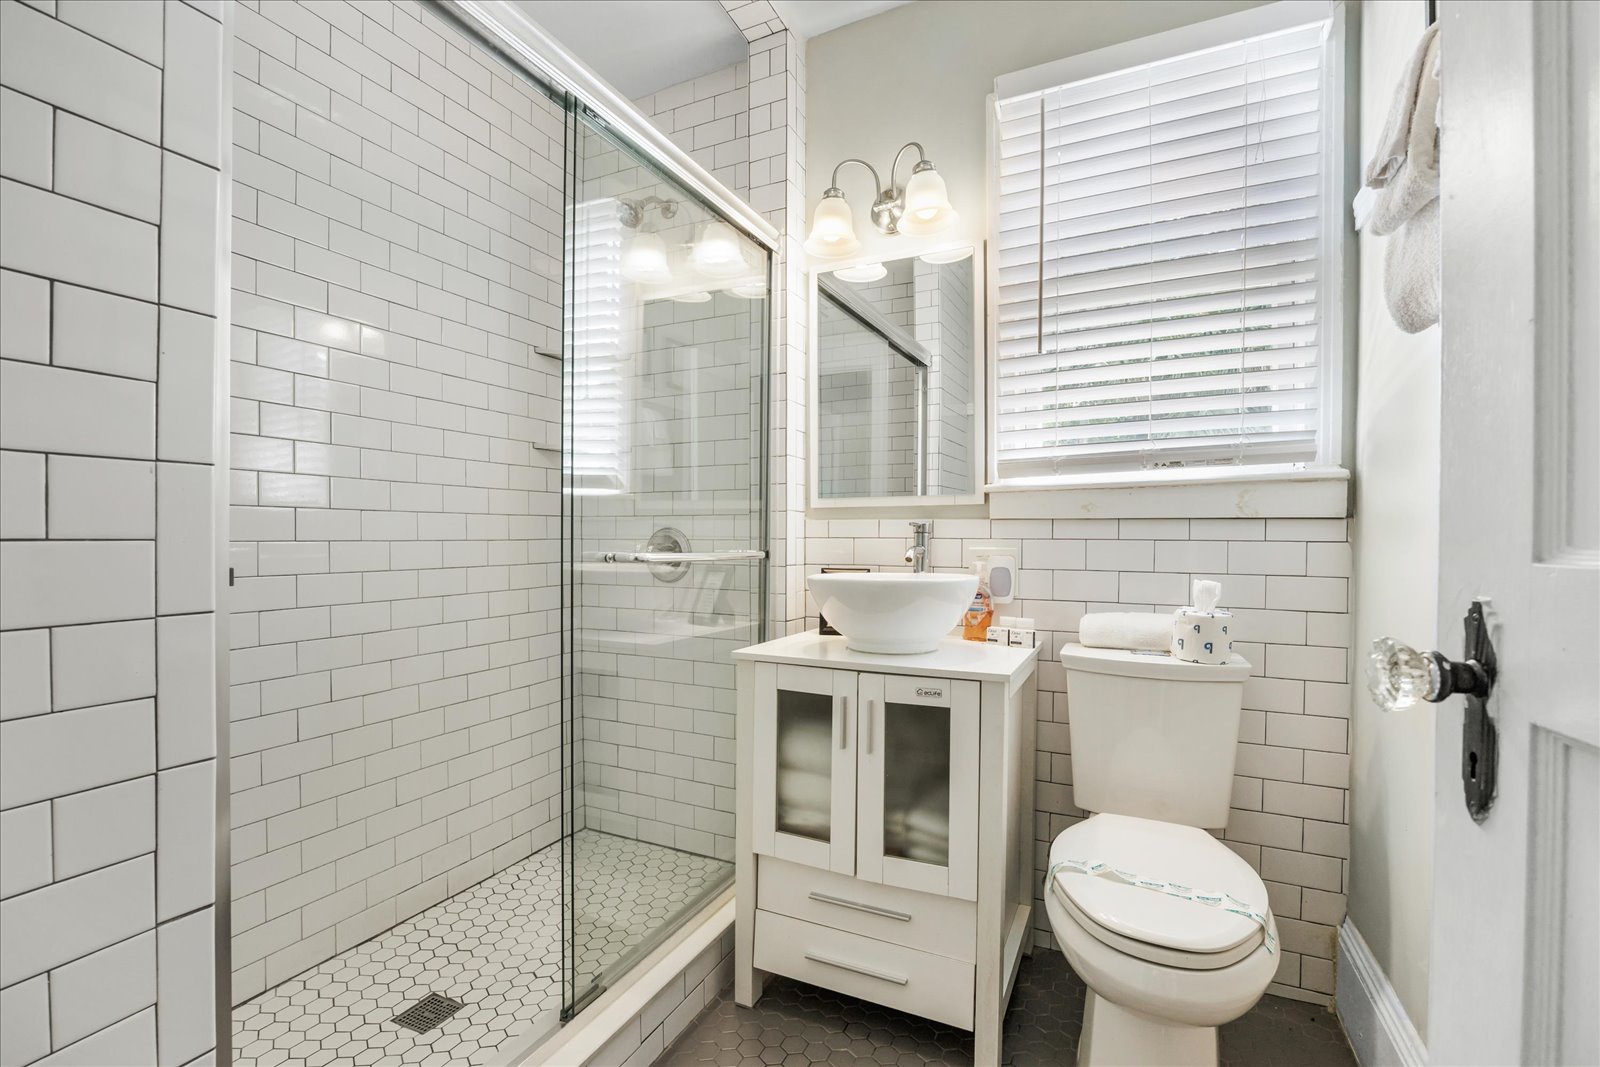 The full bathroom offers a chic single vanity & glass shower